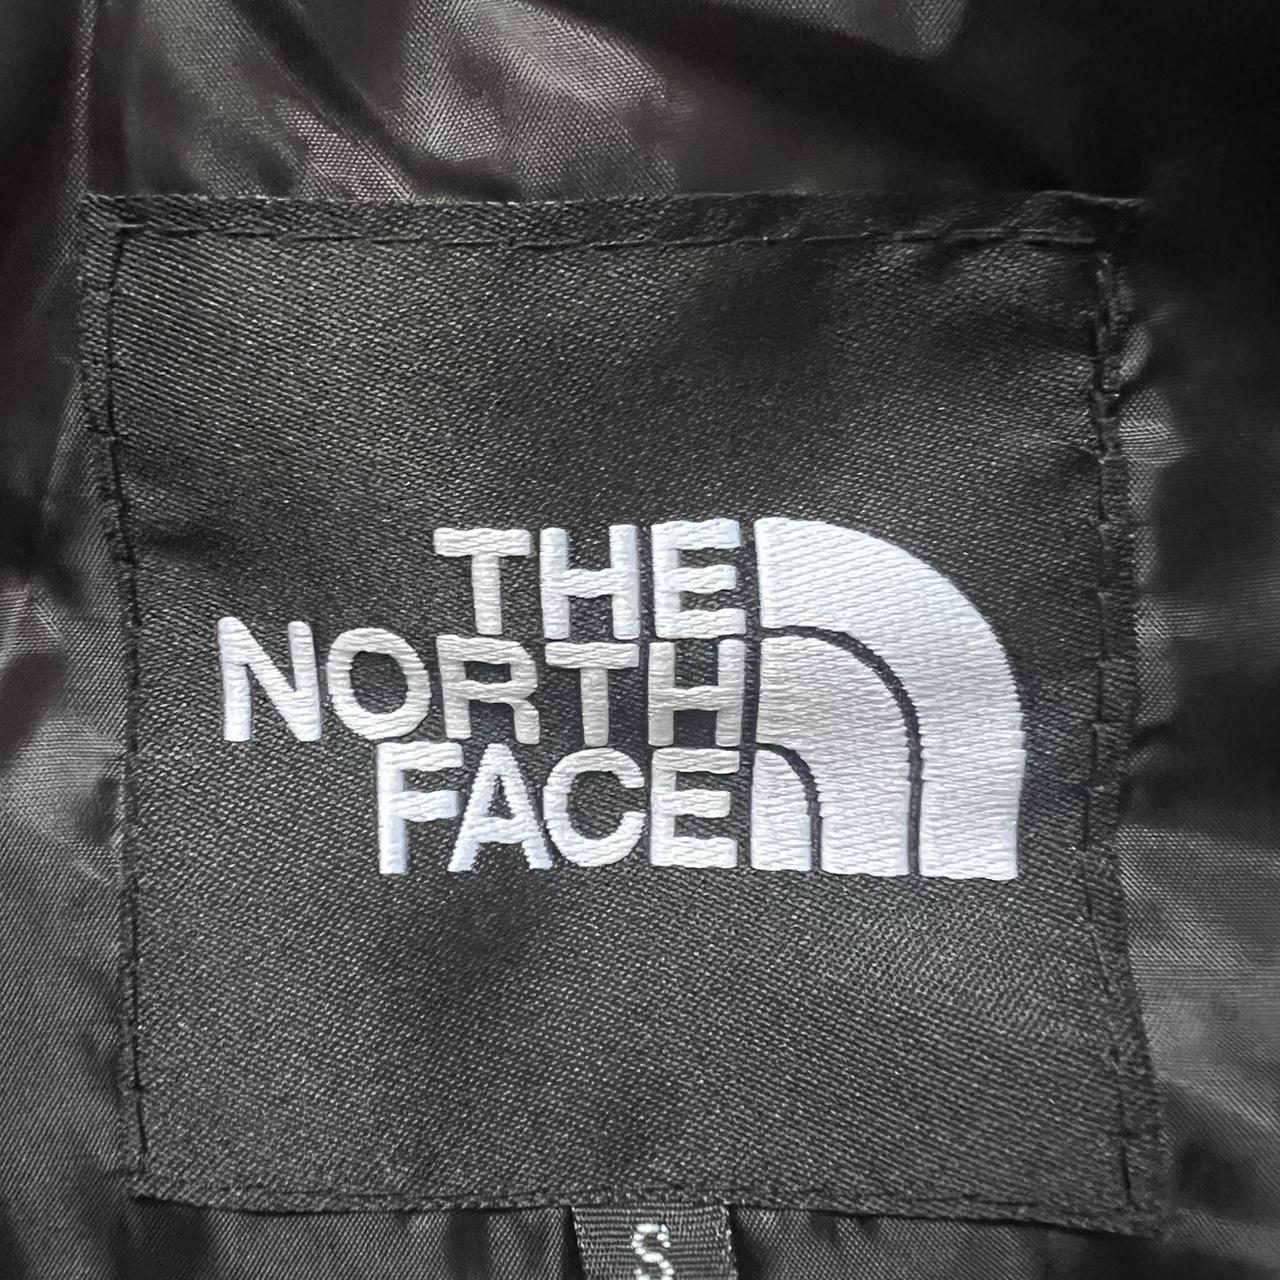 Women’s Small TNF Puffer Worn Once Selling because... - Depop